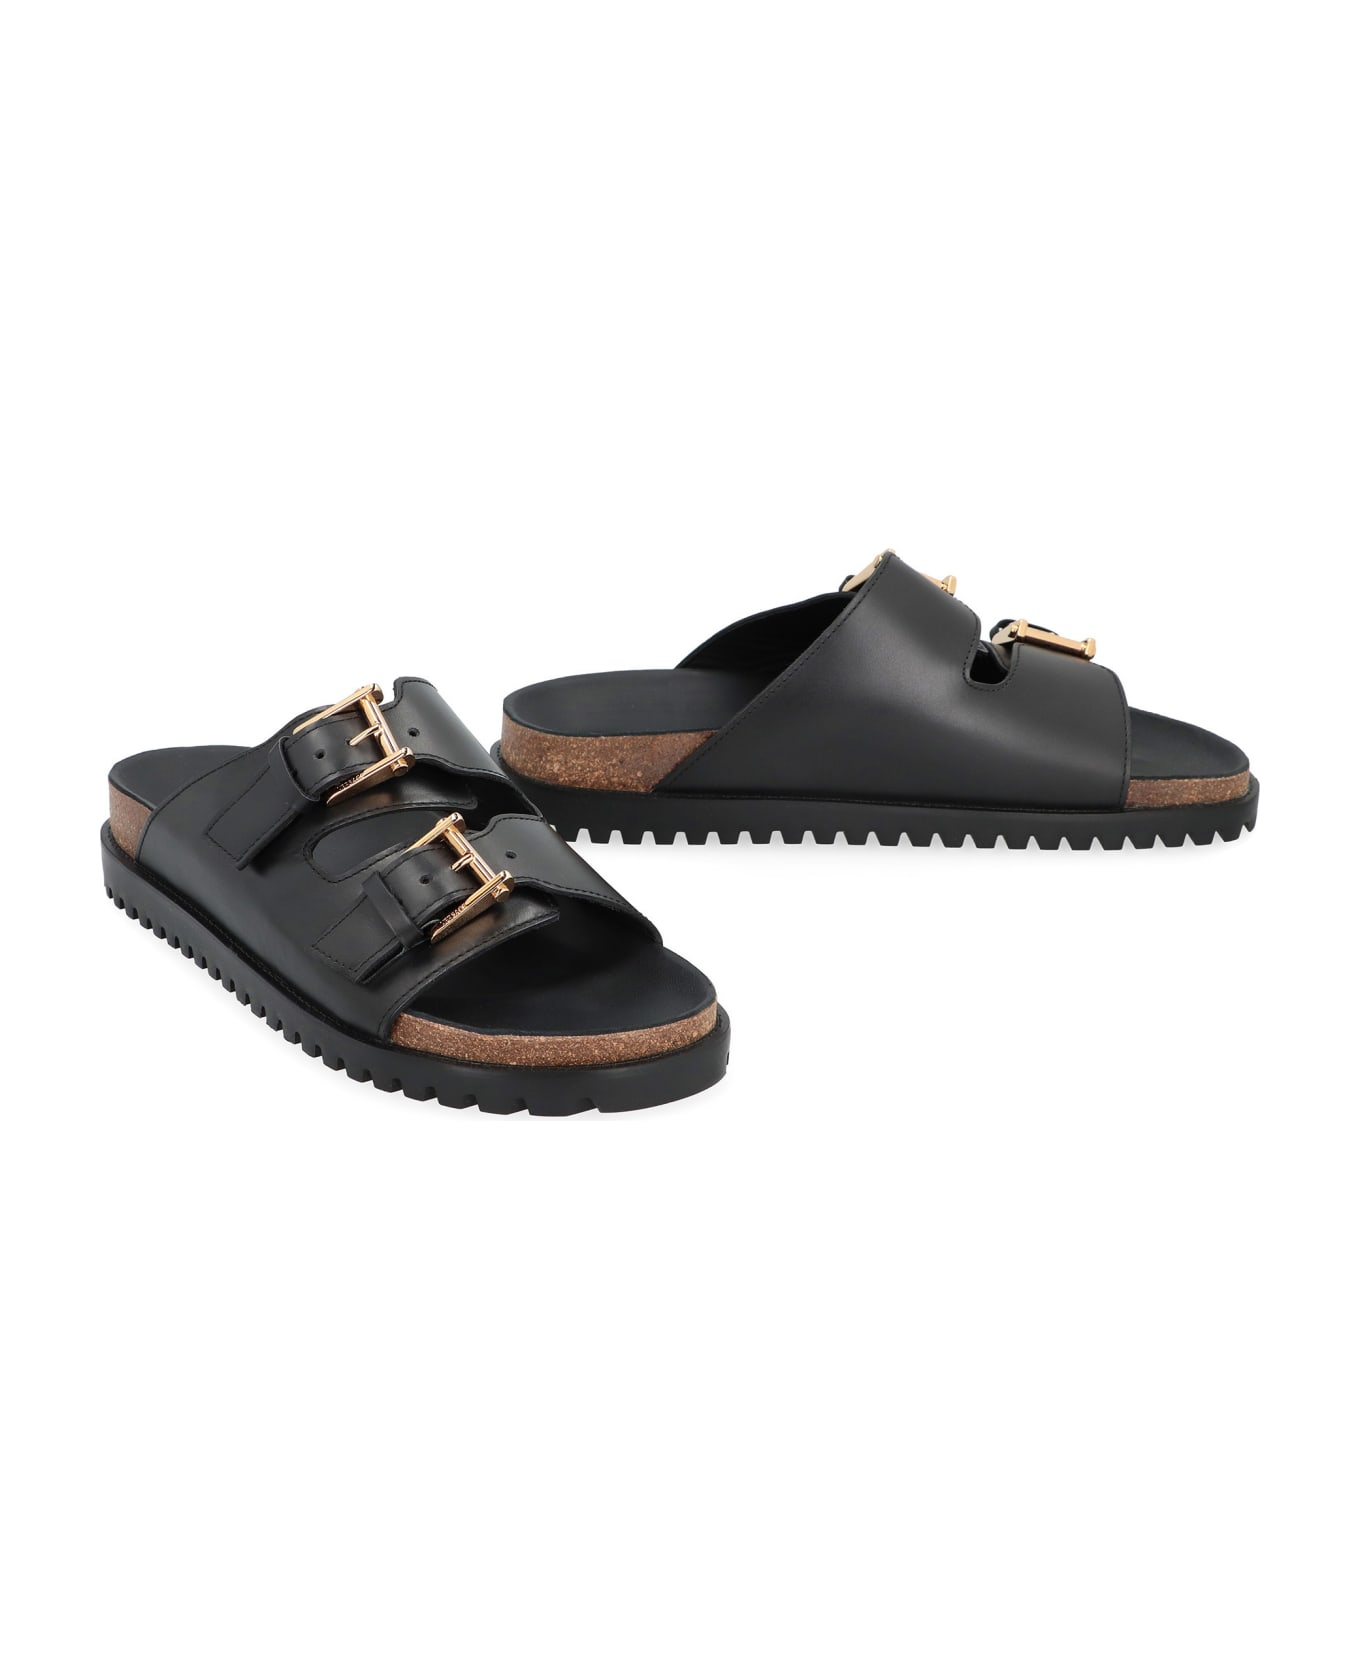 Versace Leather Sandals - black その他各種シューズ